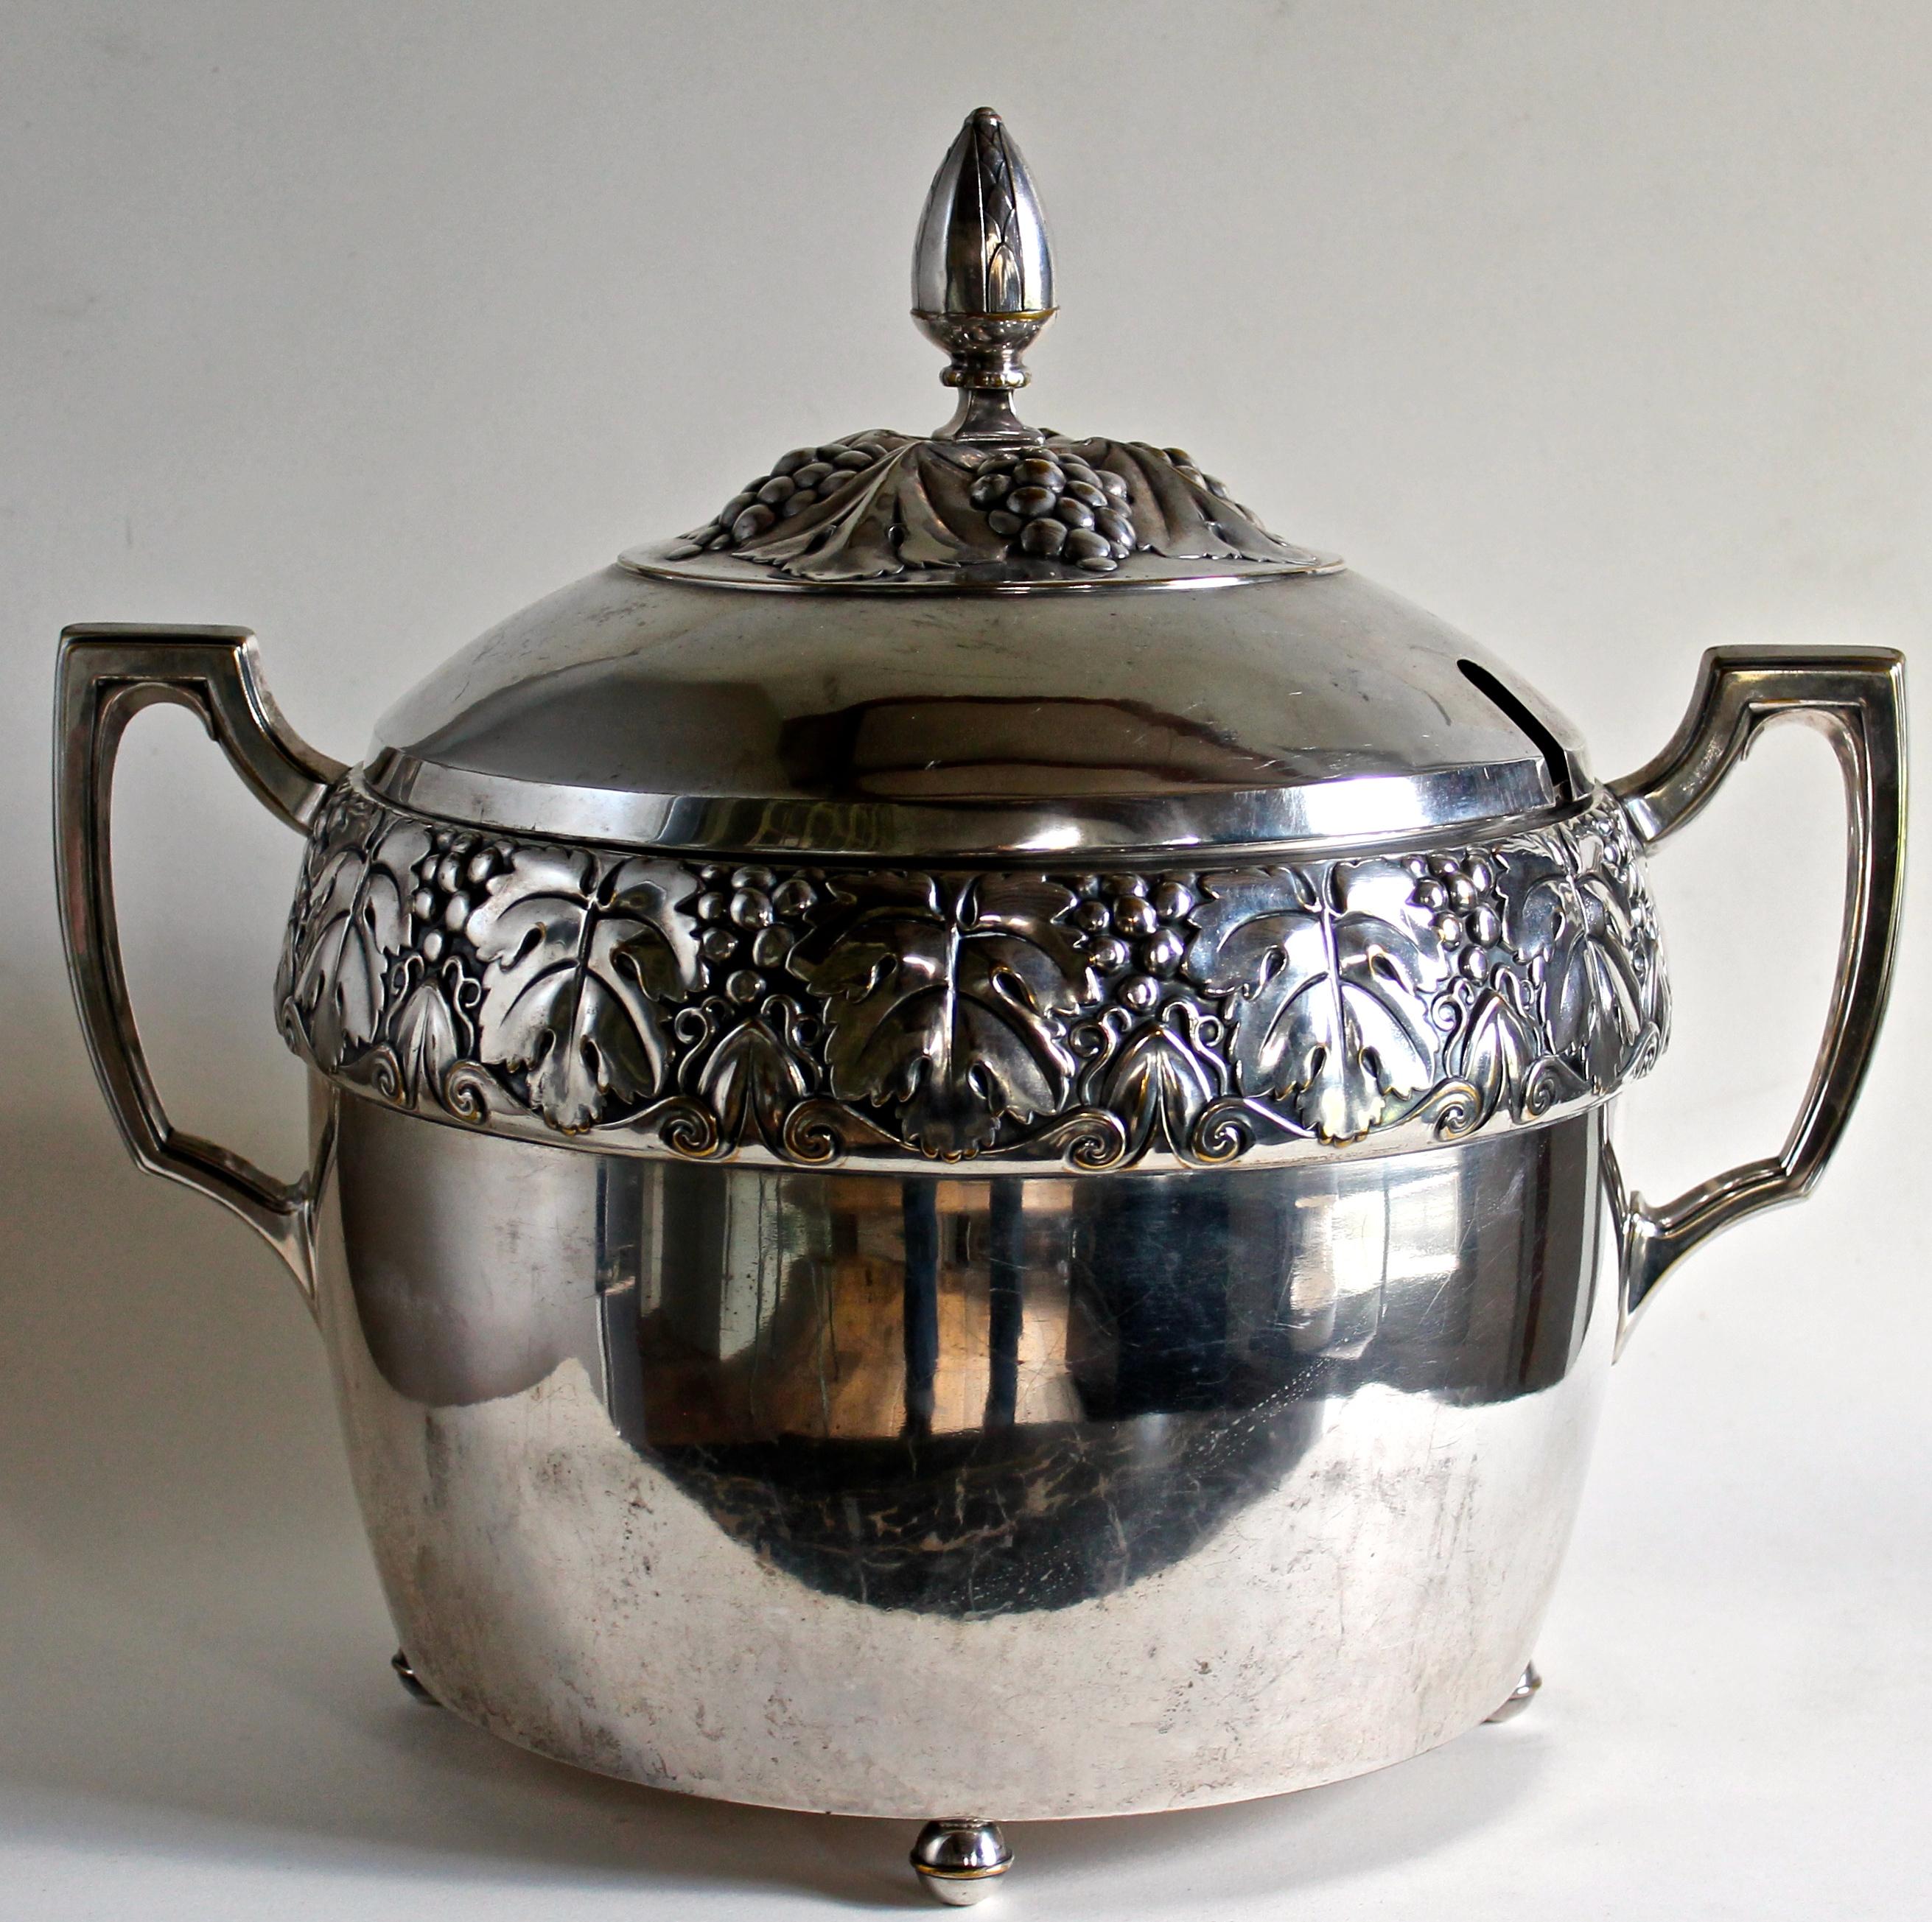 Most likely designed by Karl Berghof, designer for J P Kayser Sohn (KaiserZinn) 1900-1909. Very large Soup Tureen/Punch Bowl. Height to top of lid finial 15